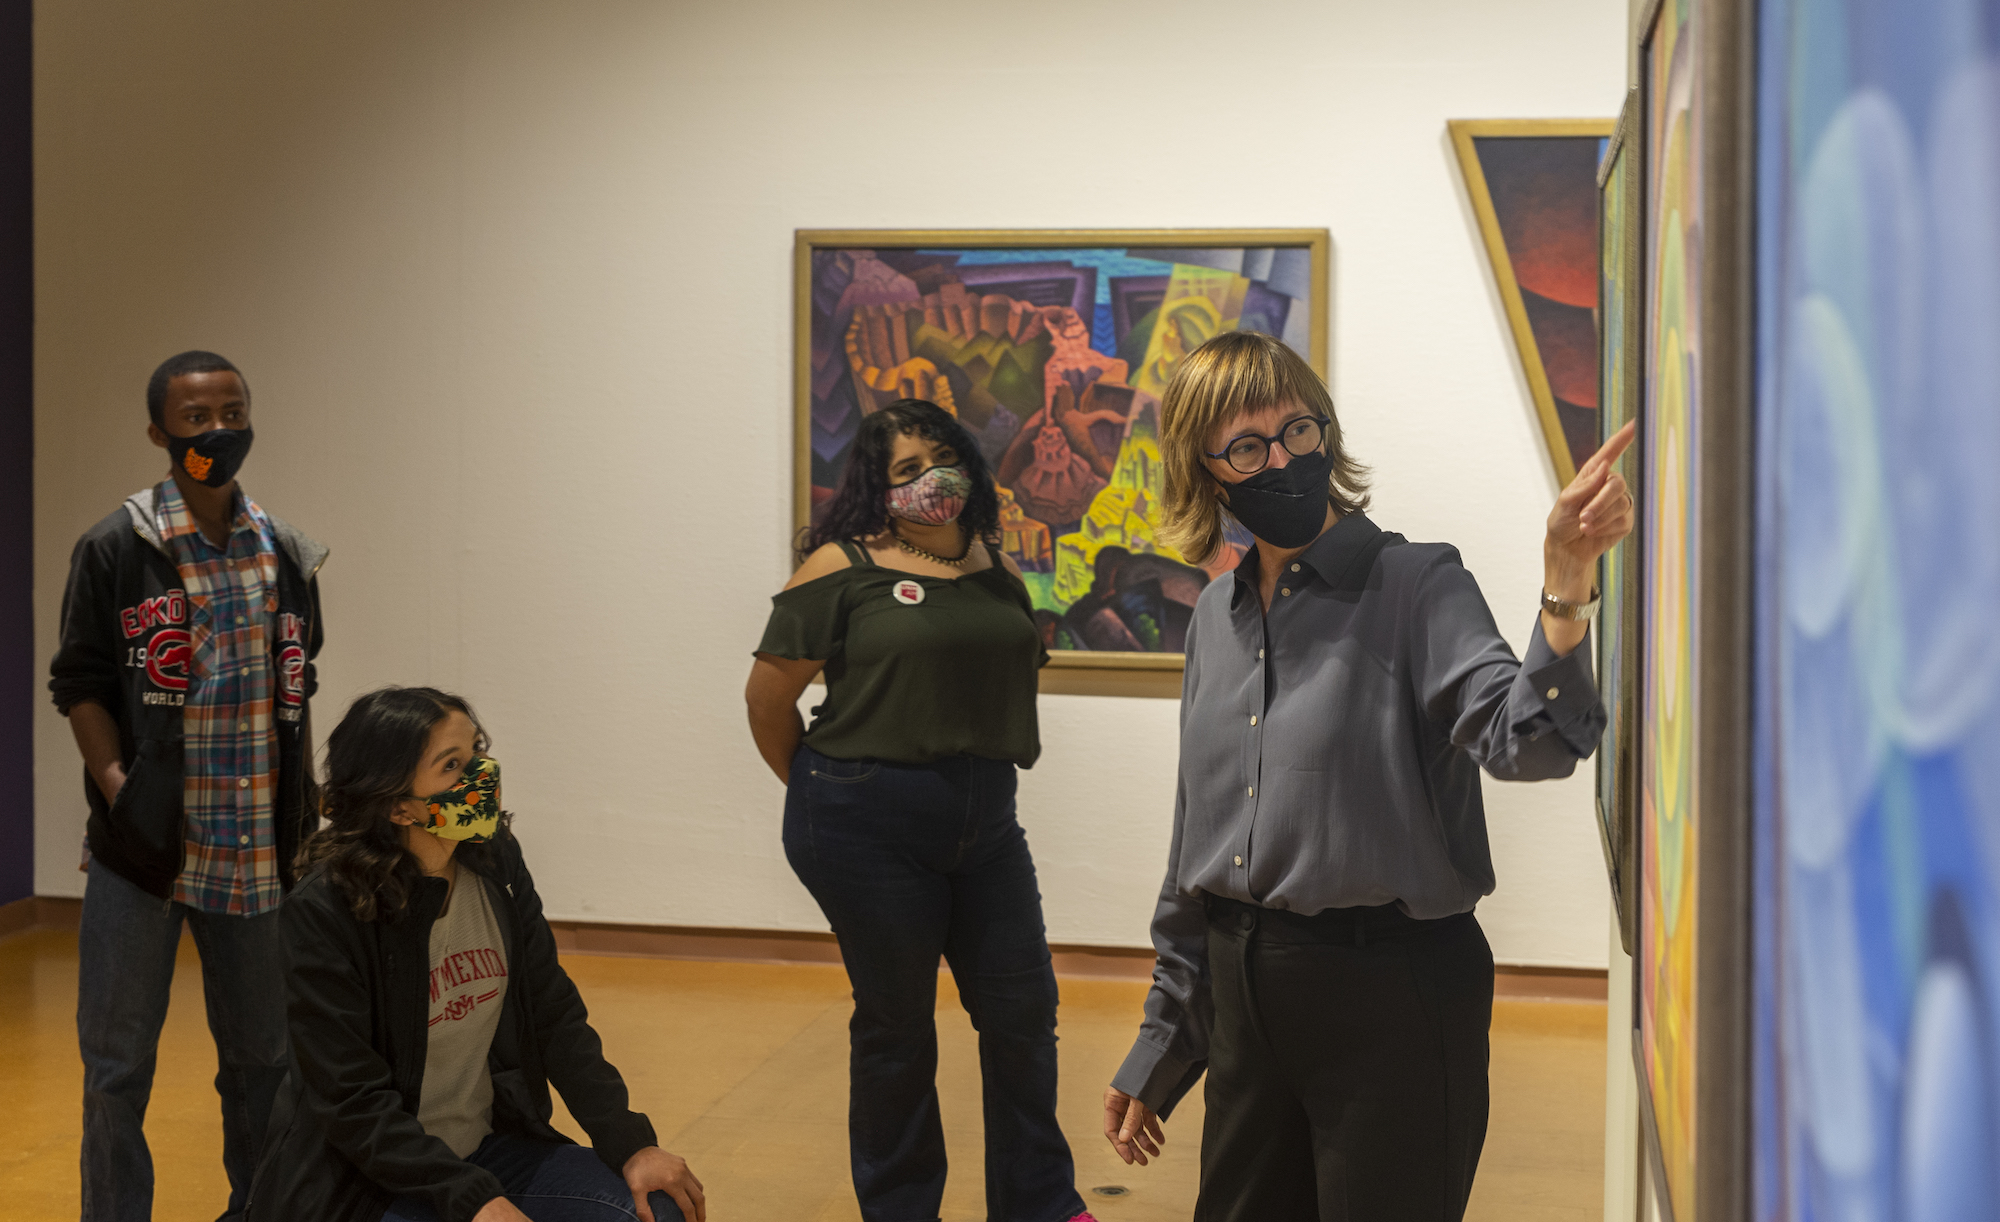 Curator Mary Statzer is photographed leading a gallery tour of "Visionary Modern: Raymond Jonson Trilogies, Cycles, and Portraits," with three college students in attendance.